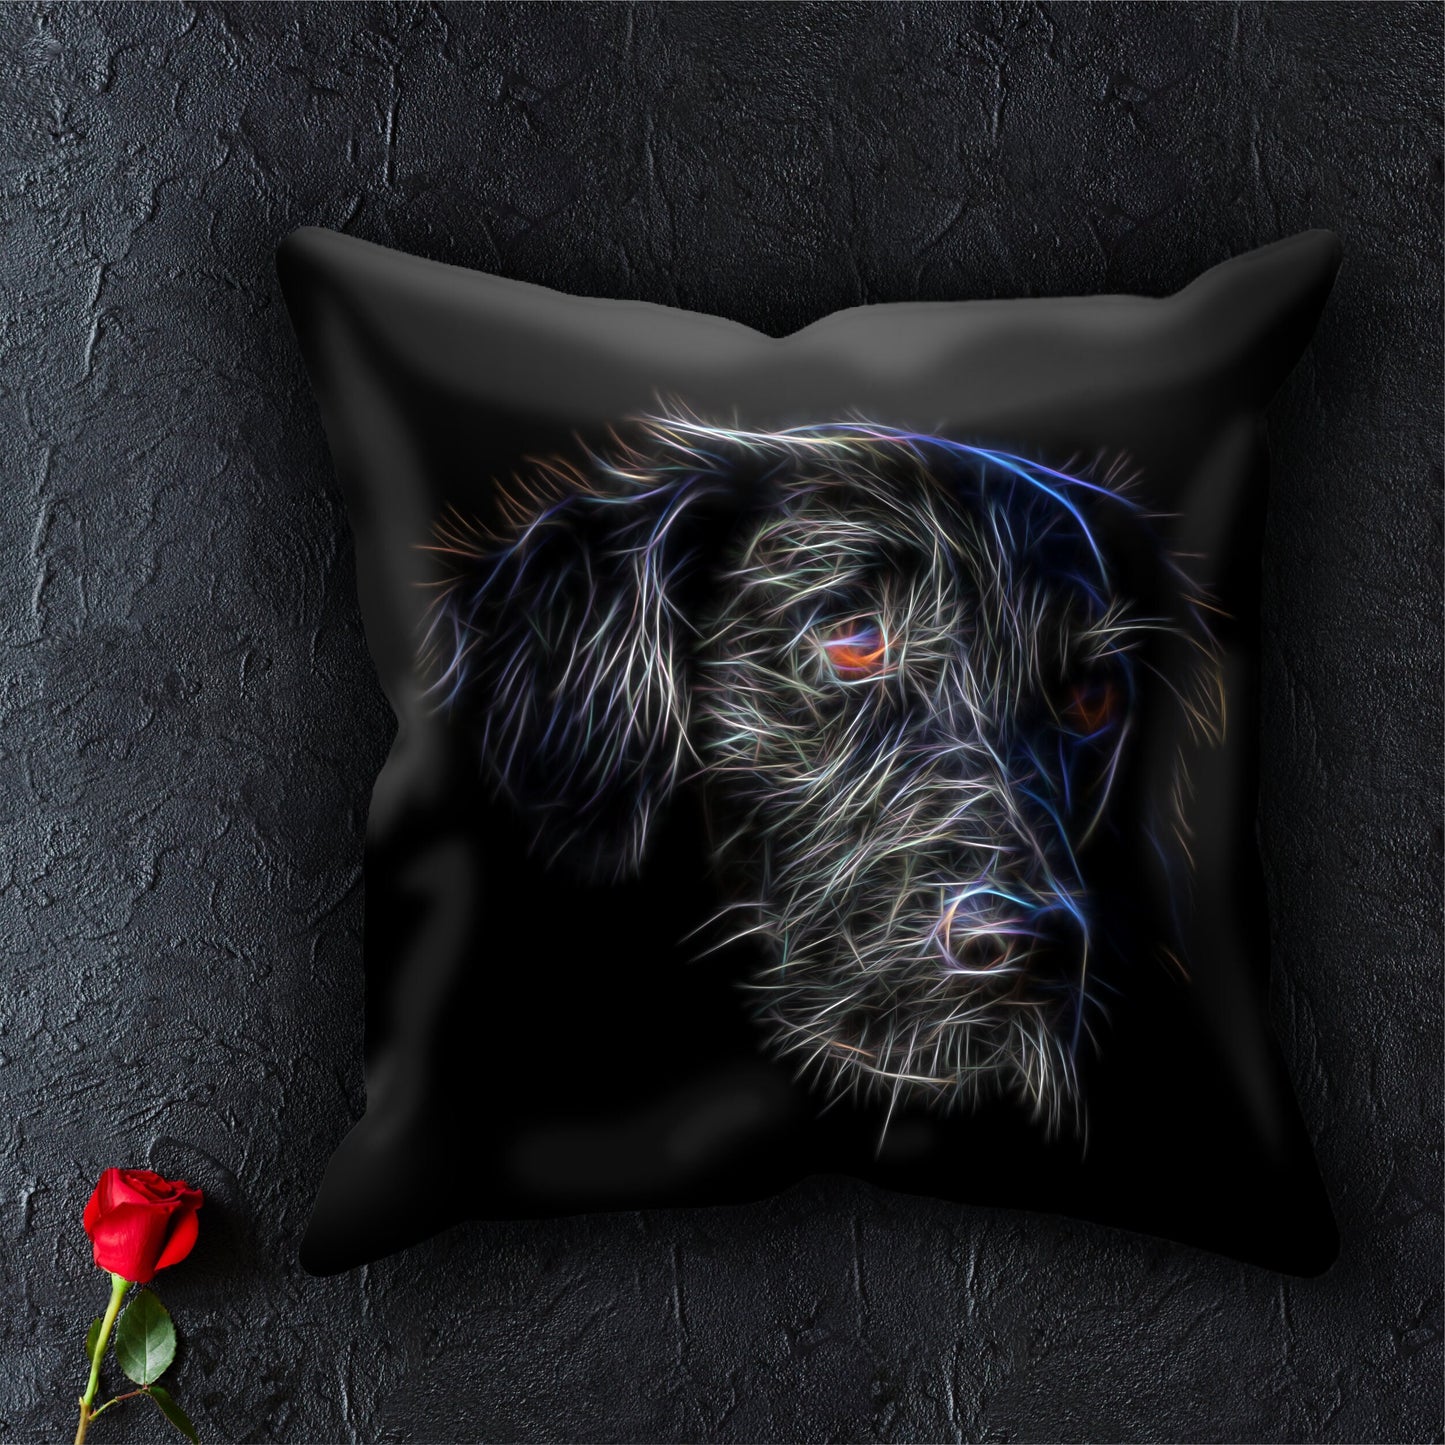 Flat Coated Retriever Cushion and Insert with Stunning Fractal Art Design